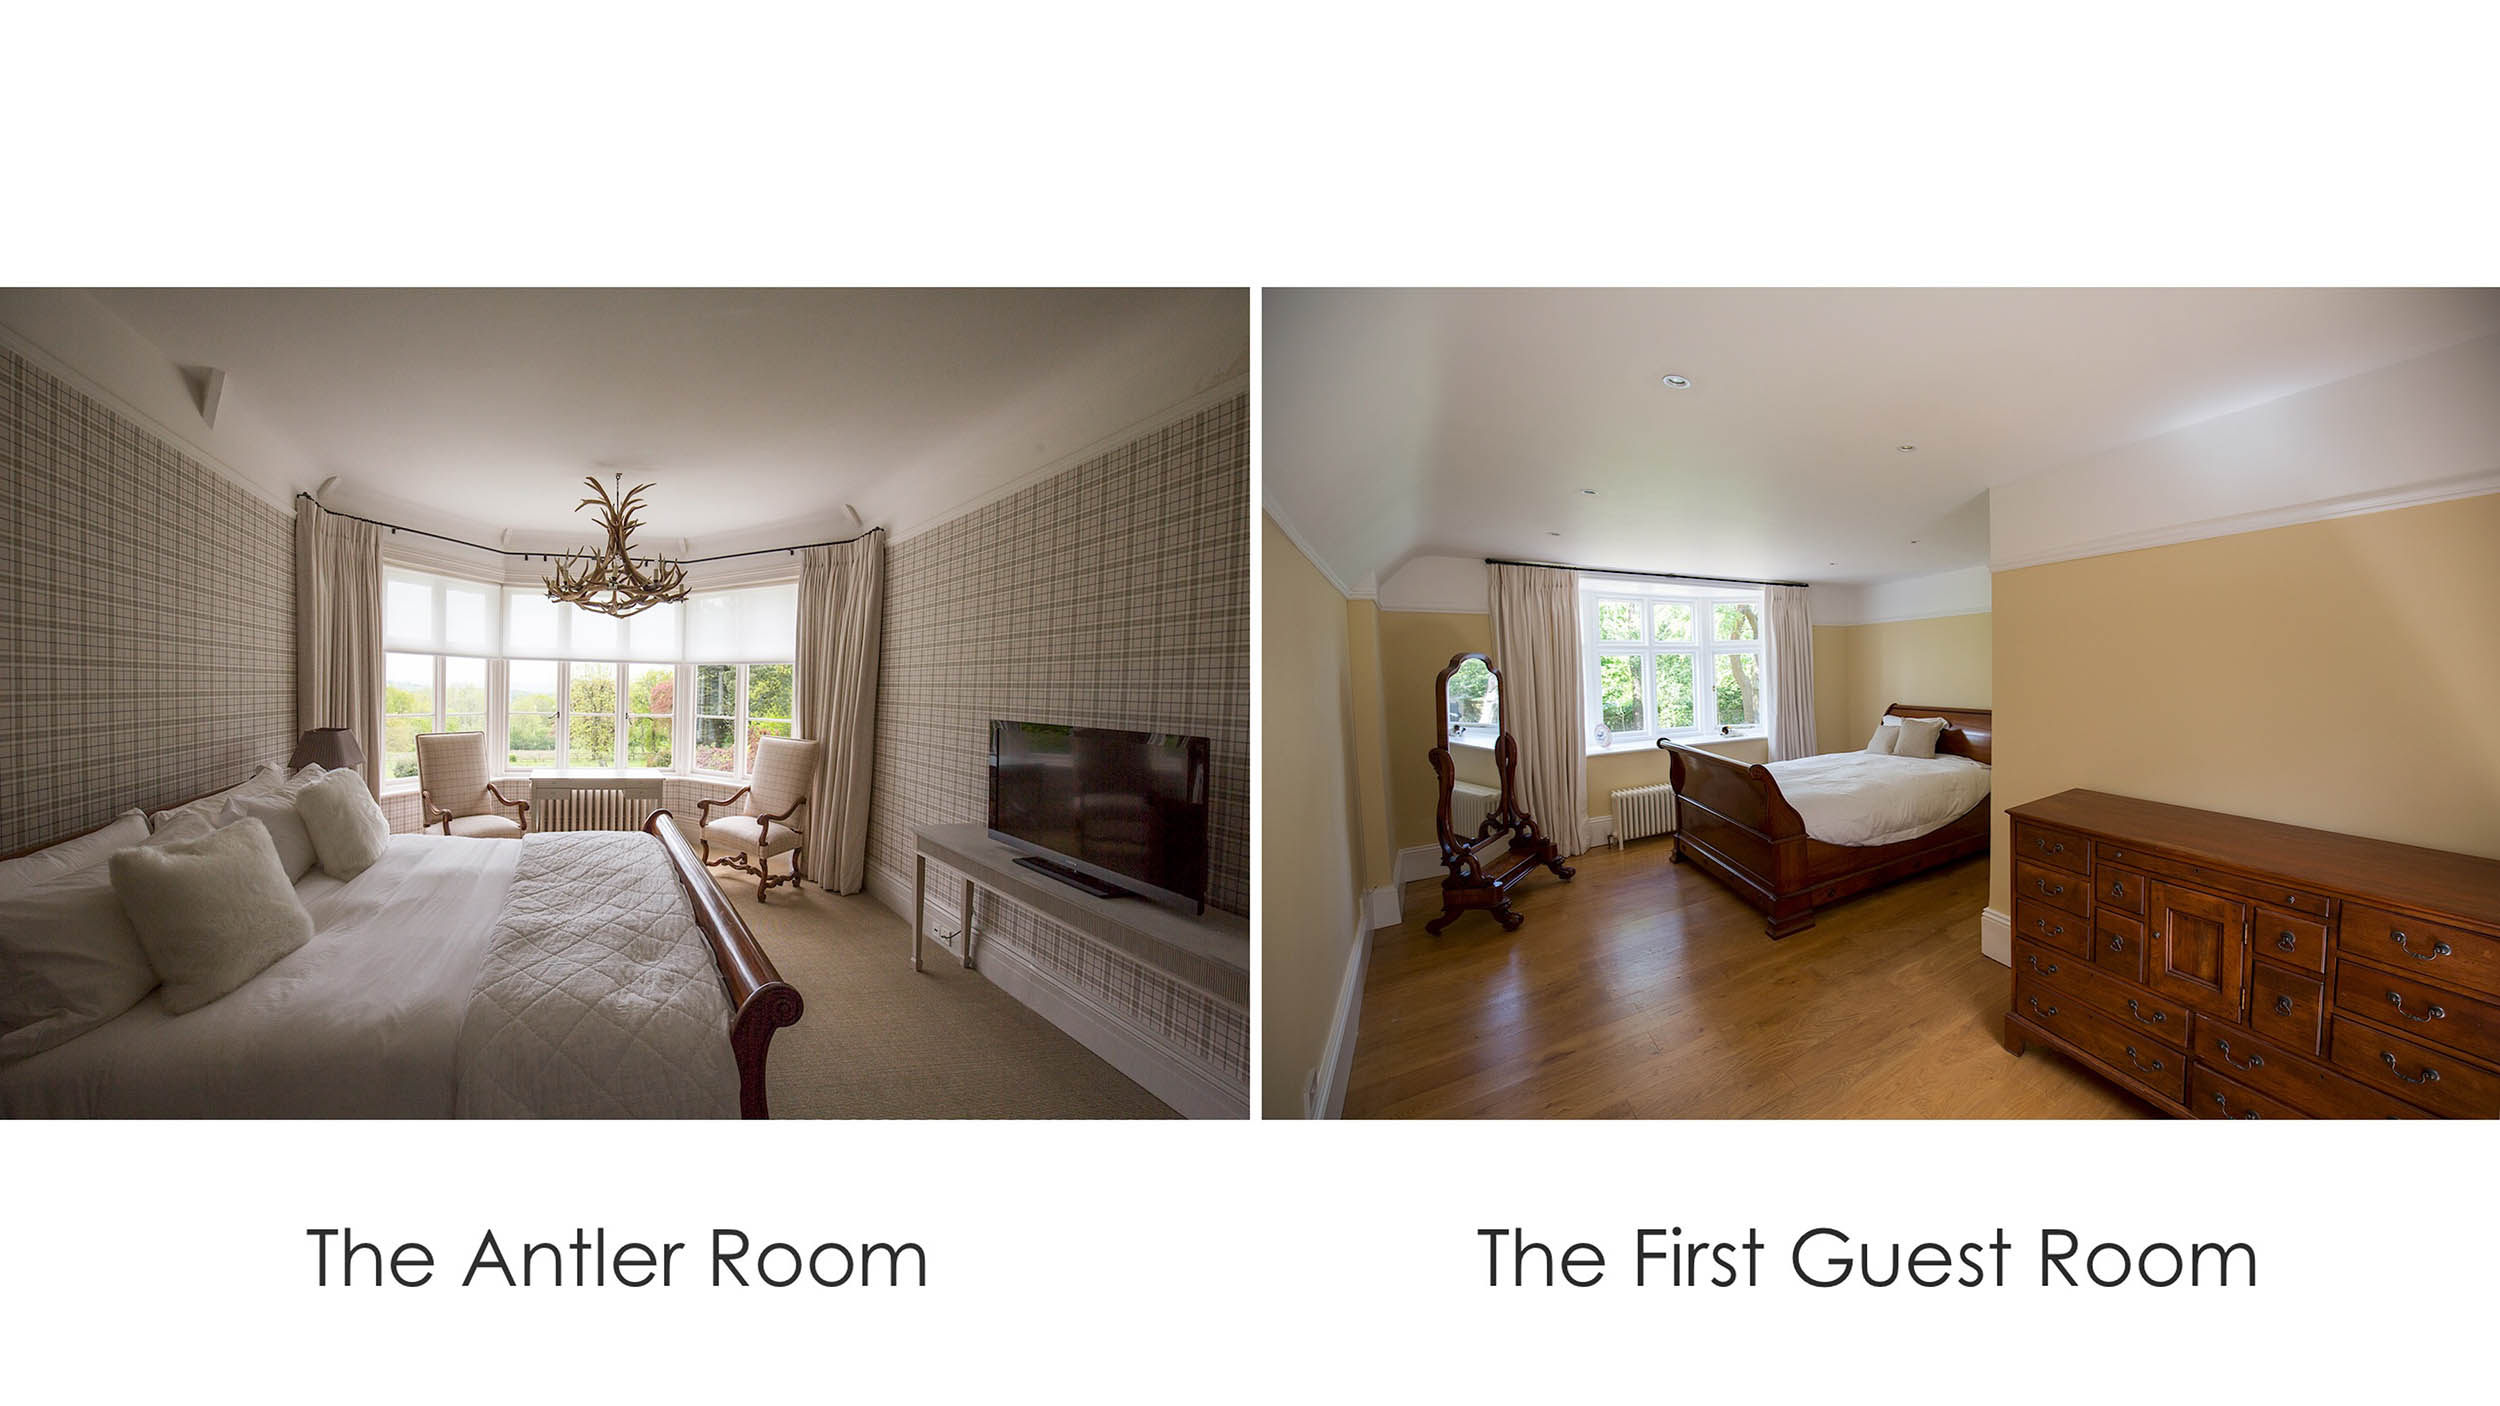 Antlar Room and Guest Room - Pennybridge House - Real Estate Development Projects by Gabriella Atkinson.